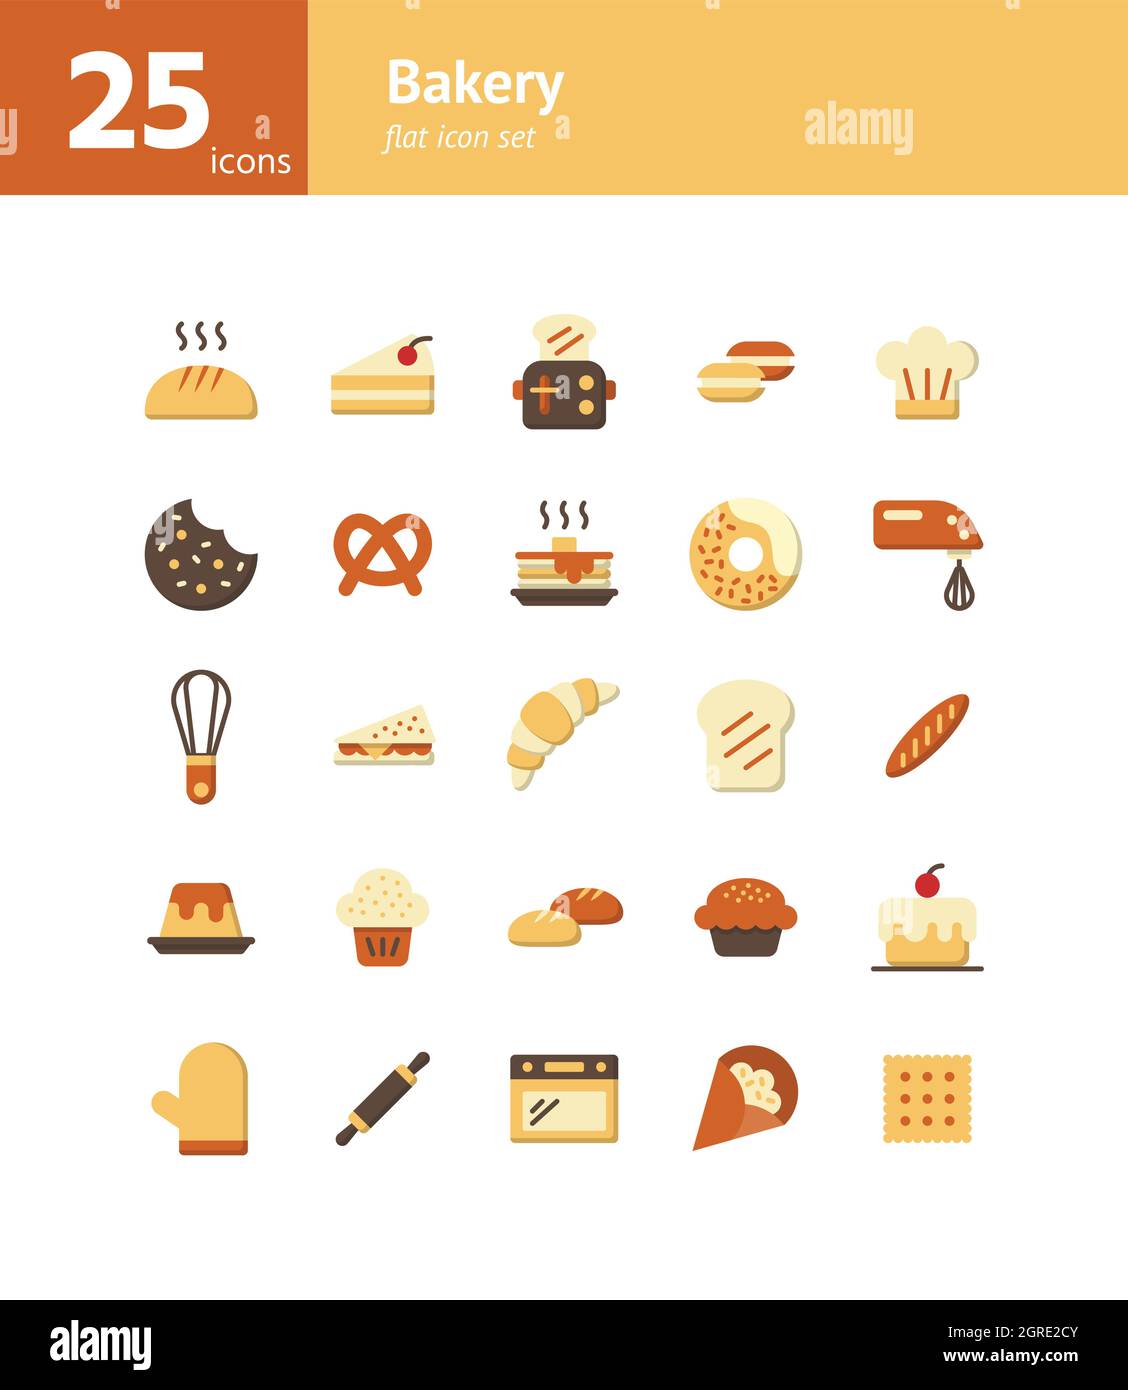 Bakery flat icon set. Vector and Illustration. Stock Vector